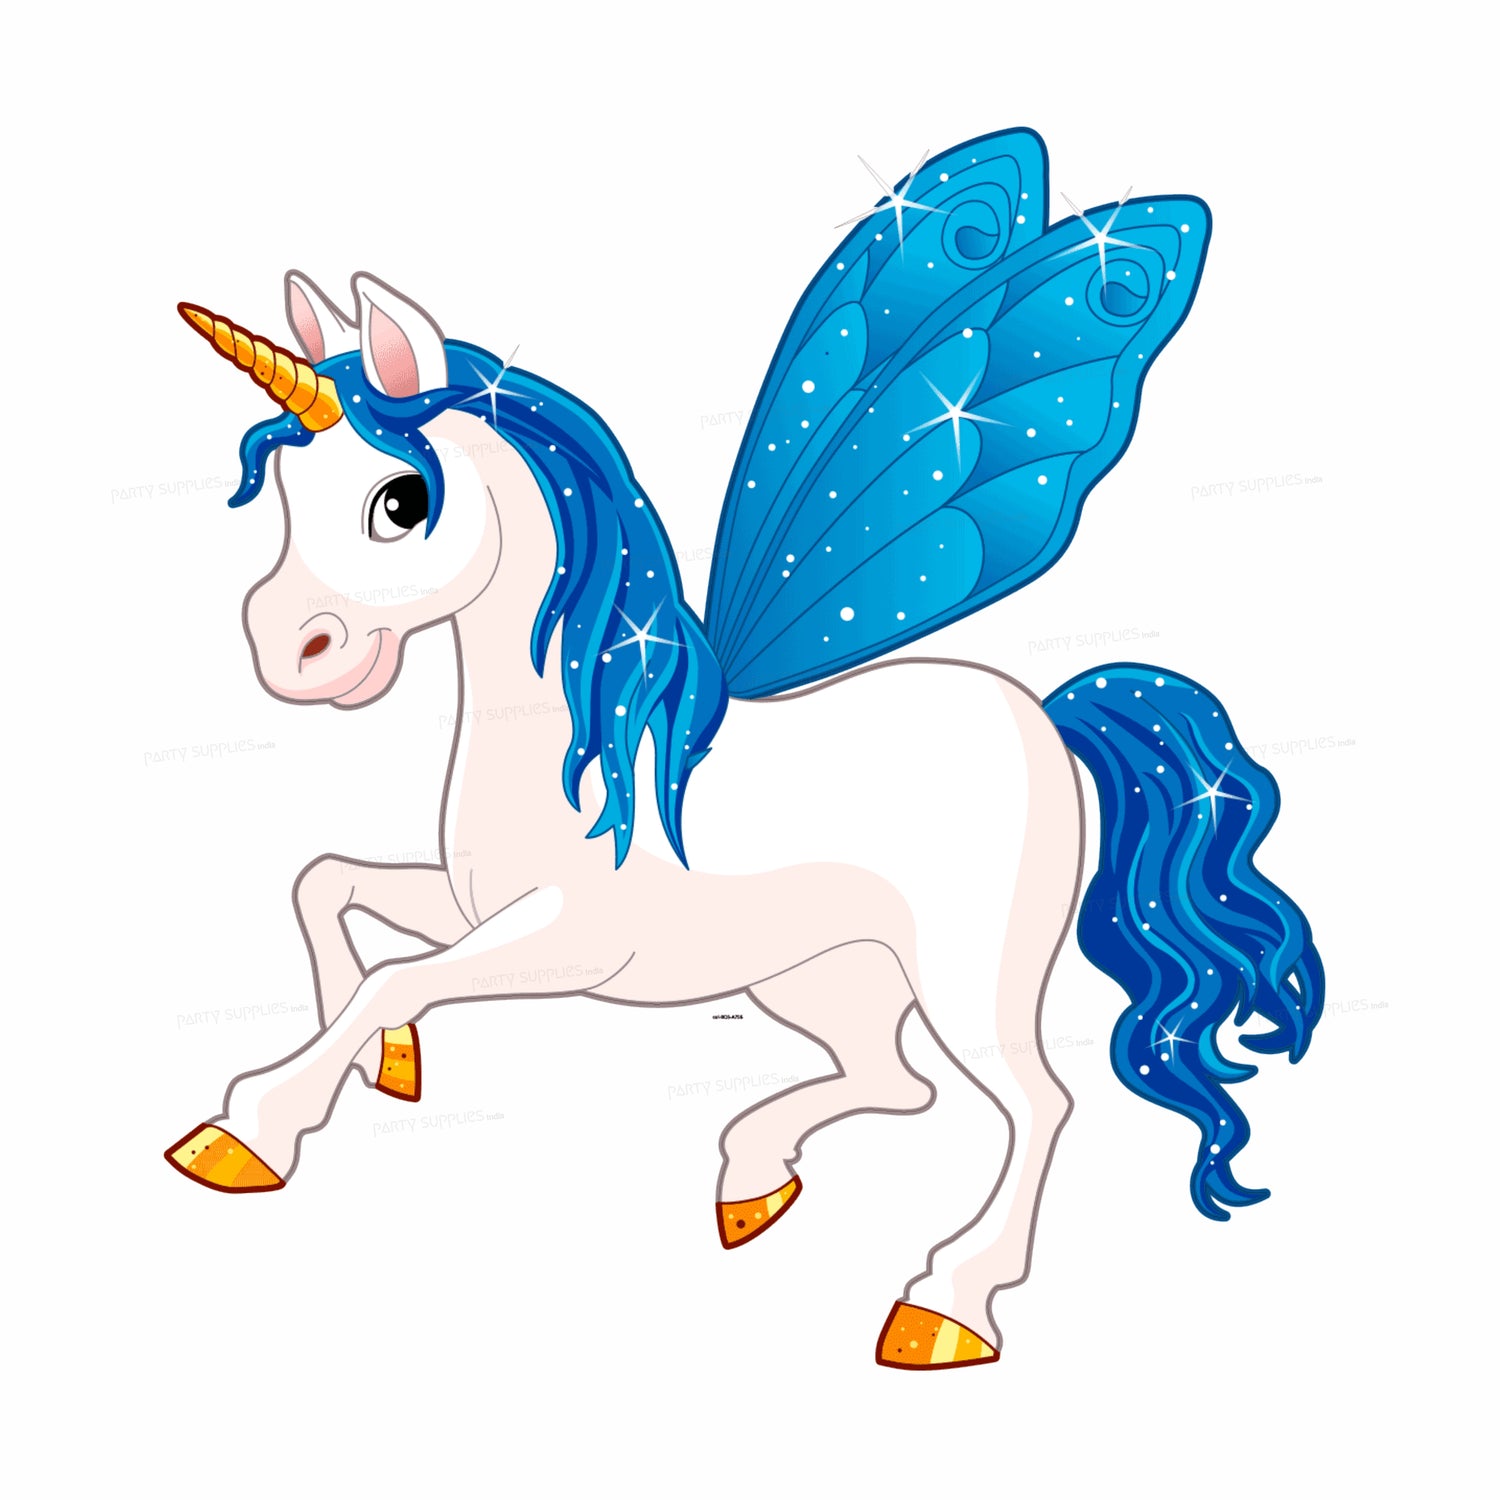 Unicorn Theme Horse with Wings Cutout